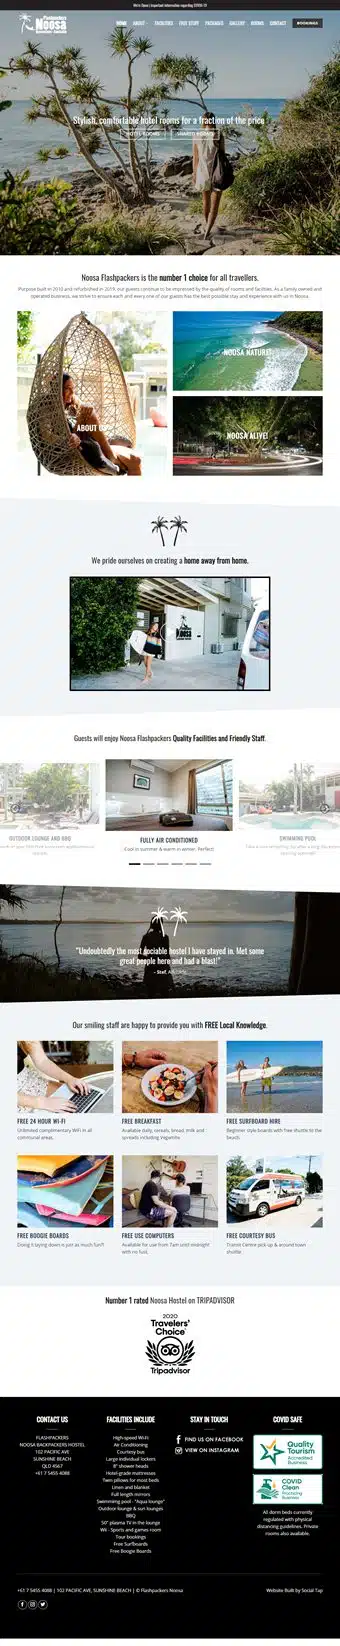 Our Work Hospitality Tourism Website Design Flashpackers Noosa